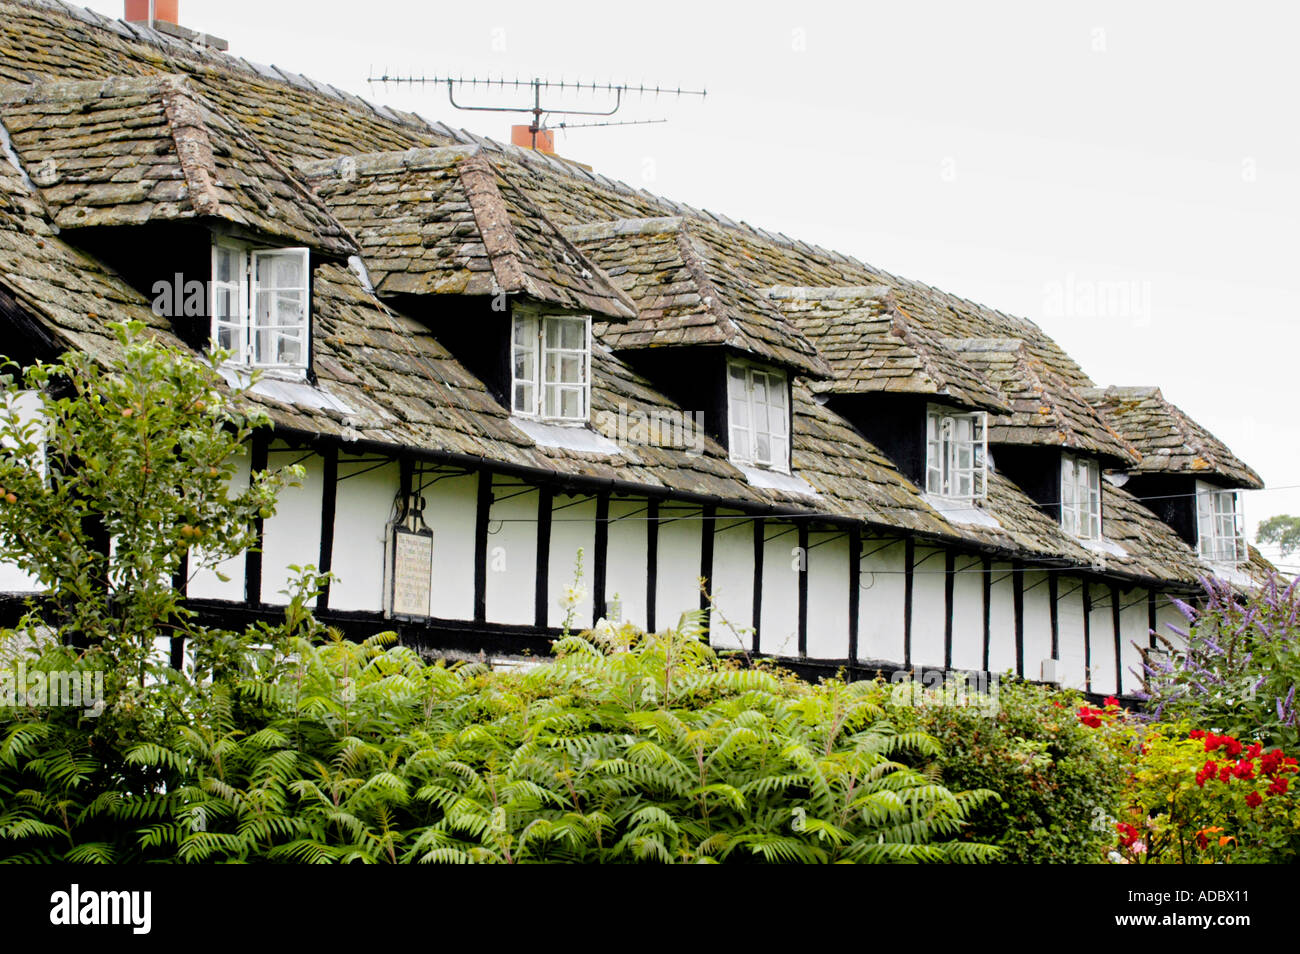 Row of black and white timber framed cottages at Pembridge Herefordshire England UK with dormer windows and stone tile roof Stock Photo